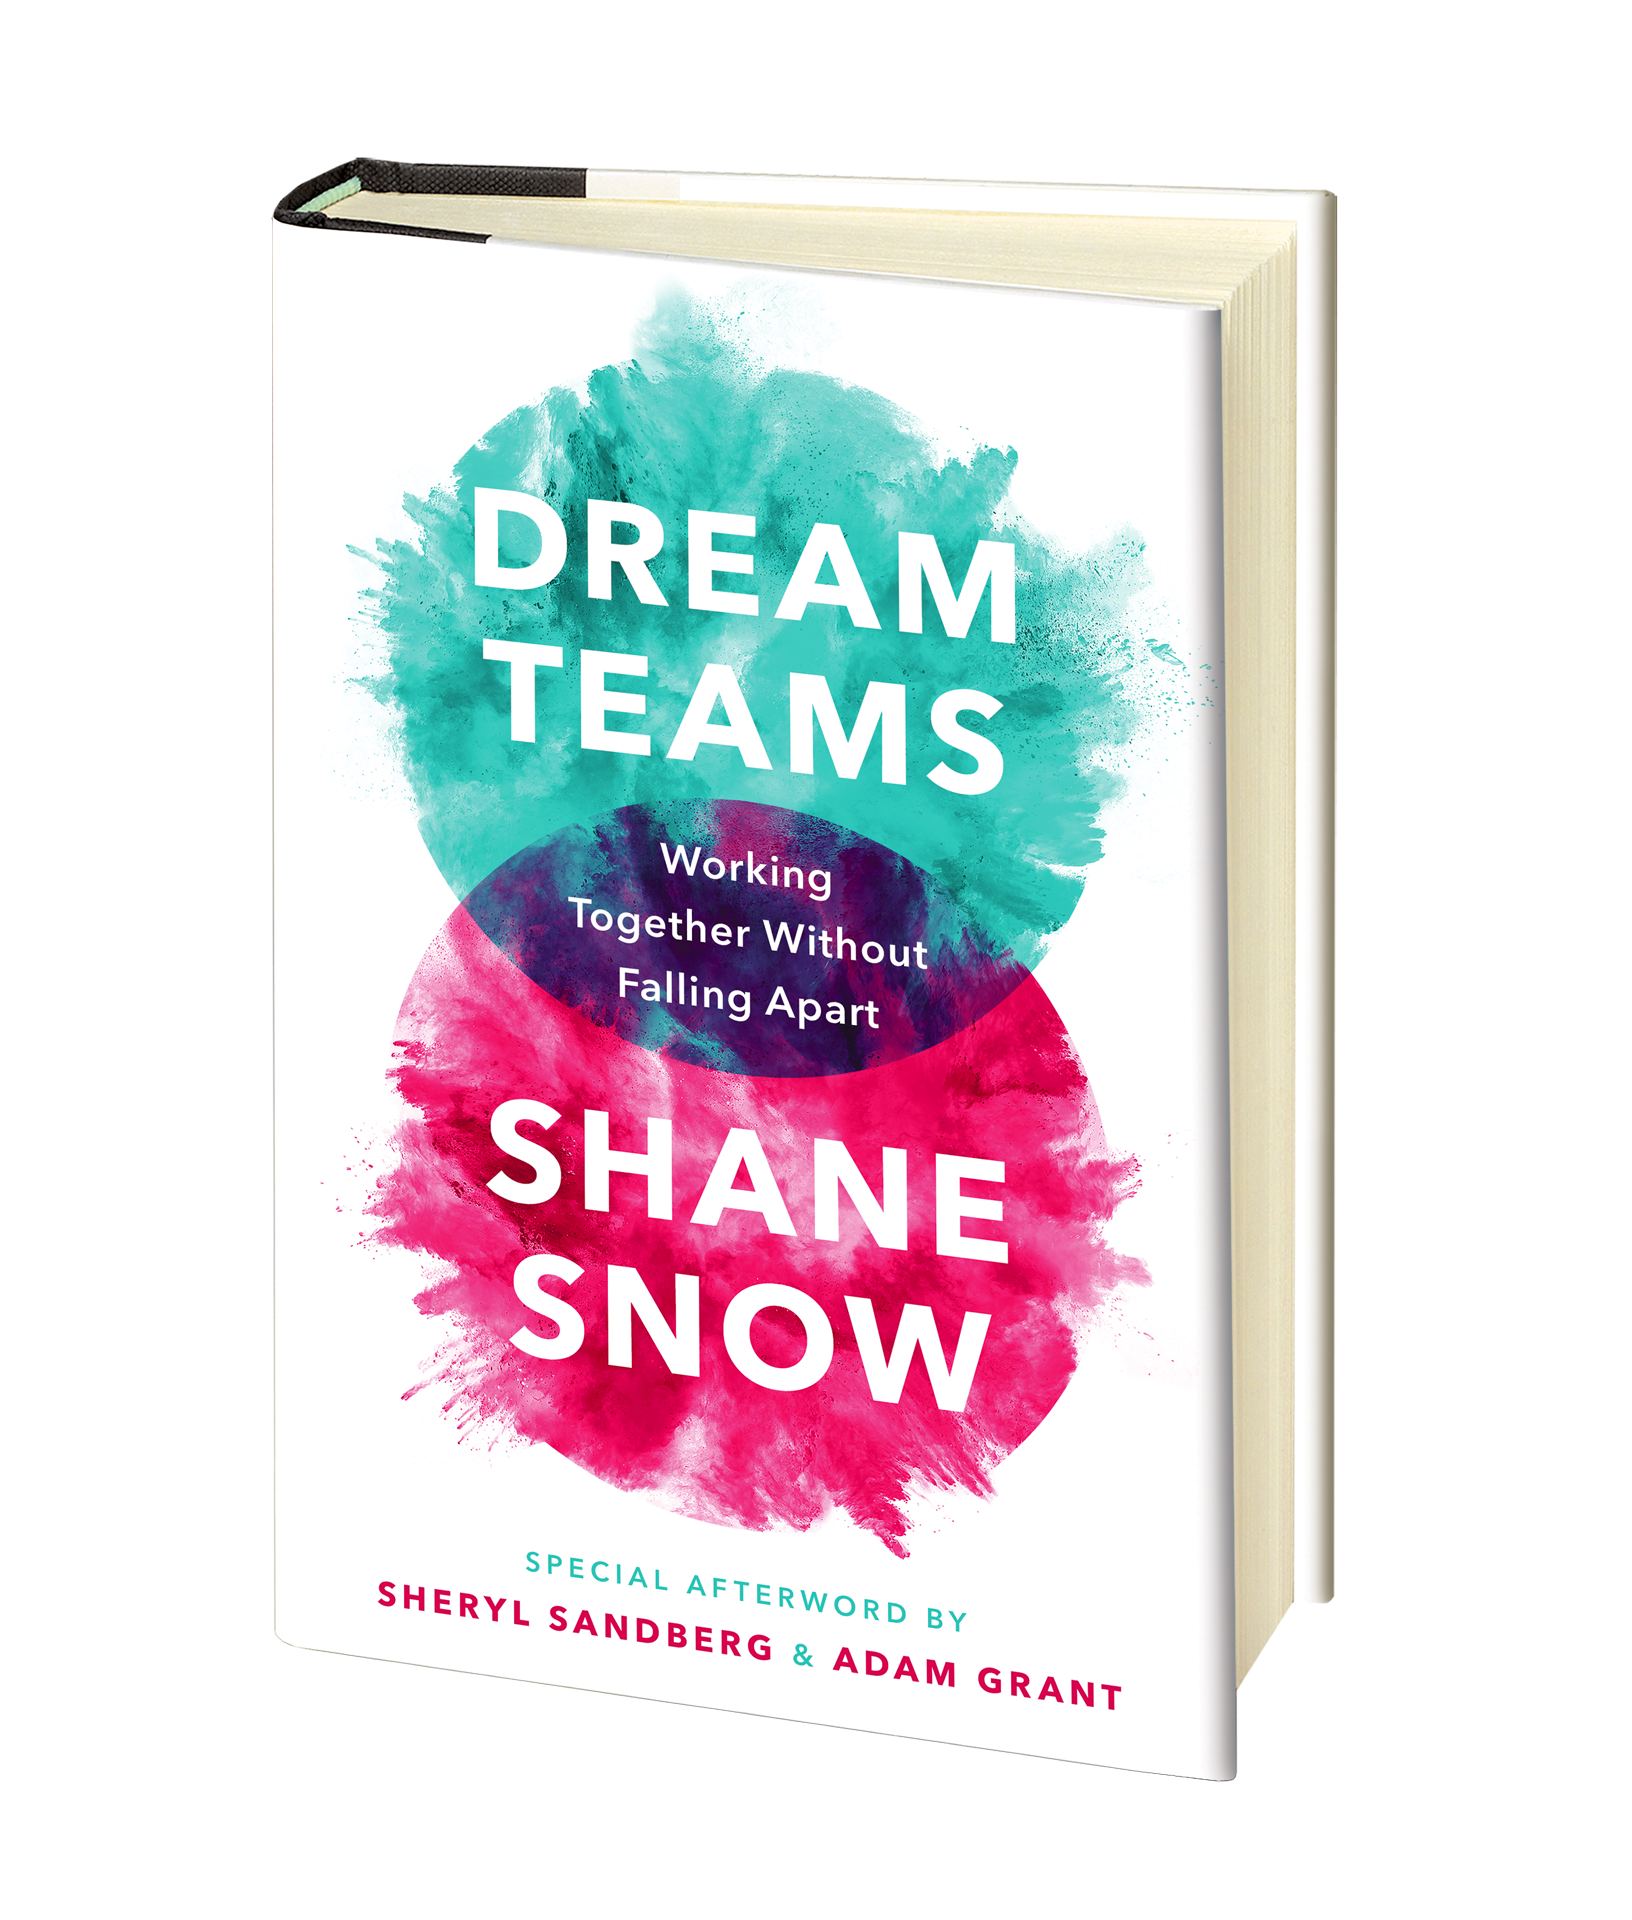 For more on Cognitive Diversity, check out the book Dream Teams